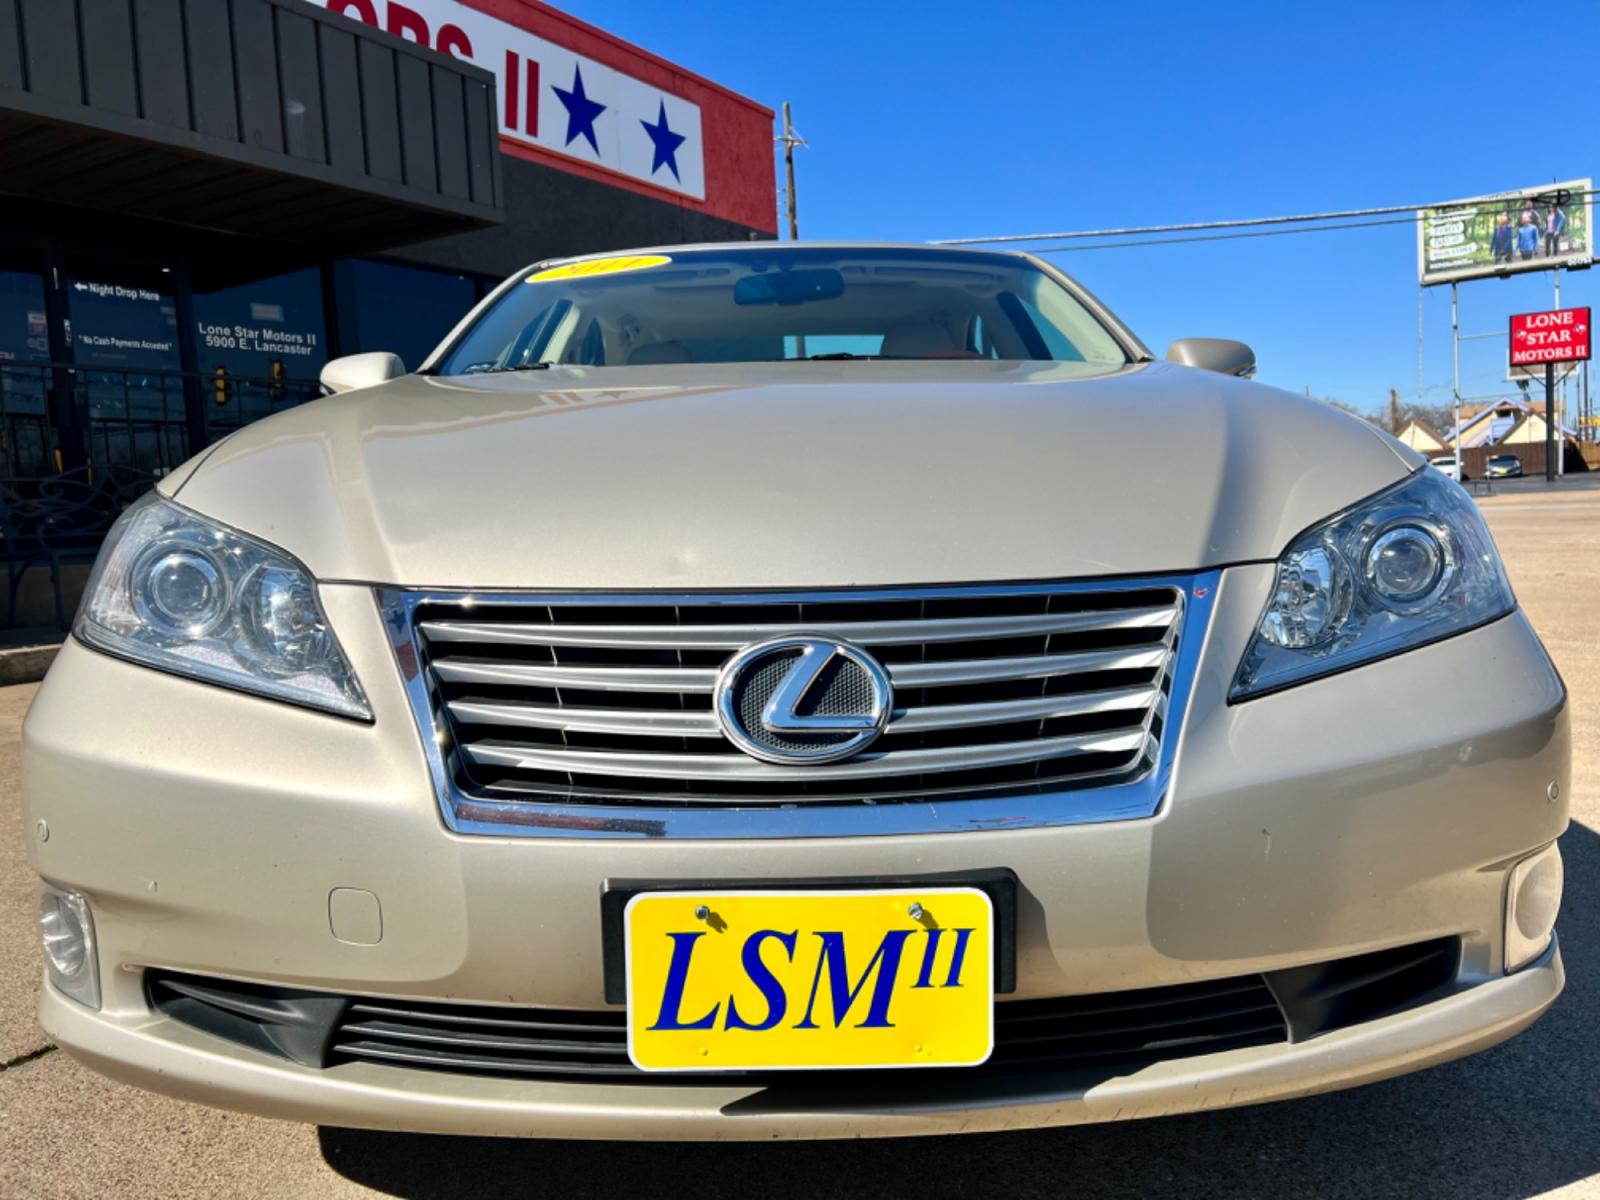 2011 GOLD LEXUS ES 350 (JTHBK1EG9B2) , located at 5900 E. Lancaster Ave., Fort Worth, TX, 76112, (817) 457-5456, 0.000000, 0.000000 - This is a 1 OWNER, 2011 LEXUS ES 350 4 DOOR SEDAN that is in excellent condition. There are no dents or scratches. The interior is clean with no rips or tears or stains. All power windows, door locks and seats. Ice cold AC for those hot Texas summer days. It is equipped with a CD player, AM/FM radio - Photo #1